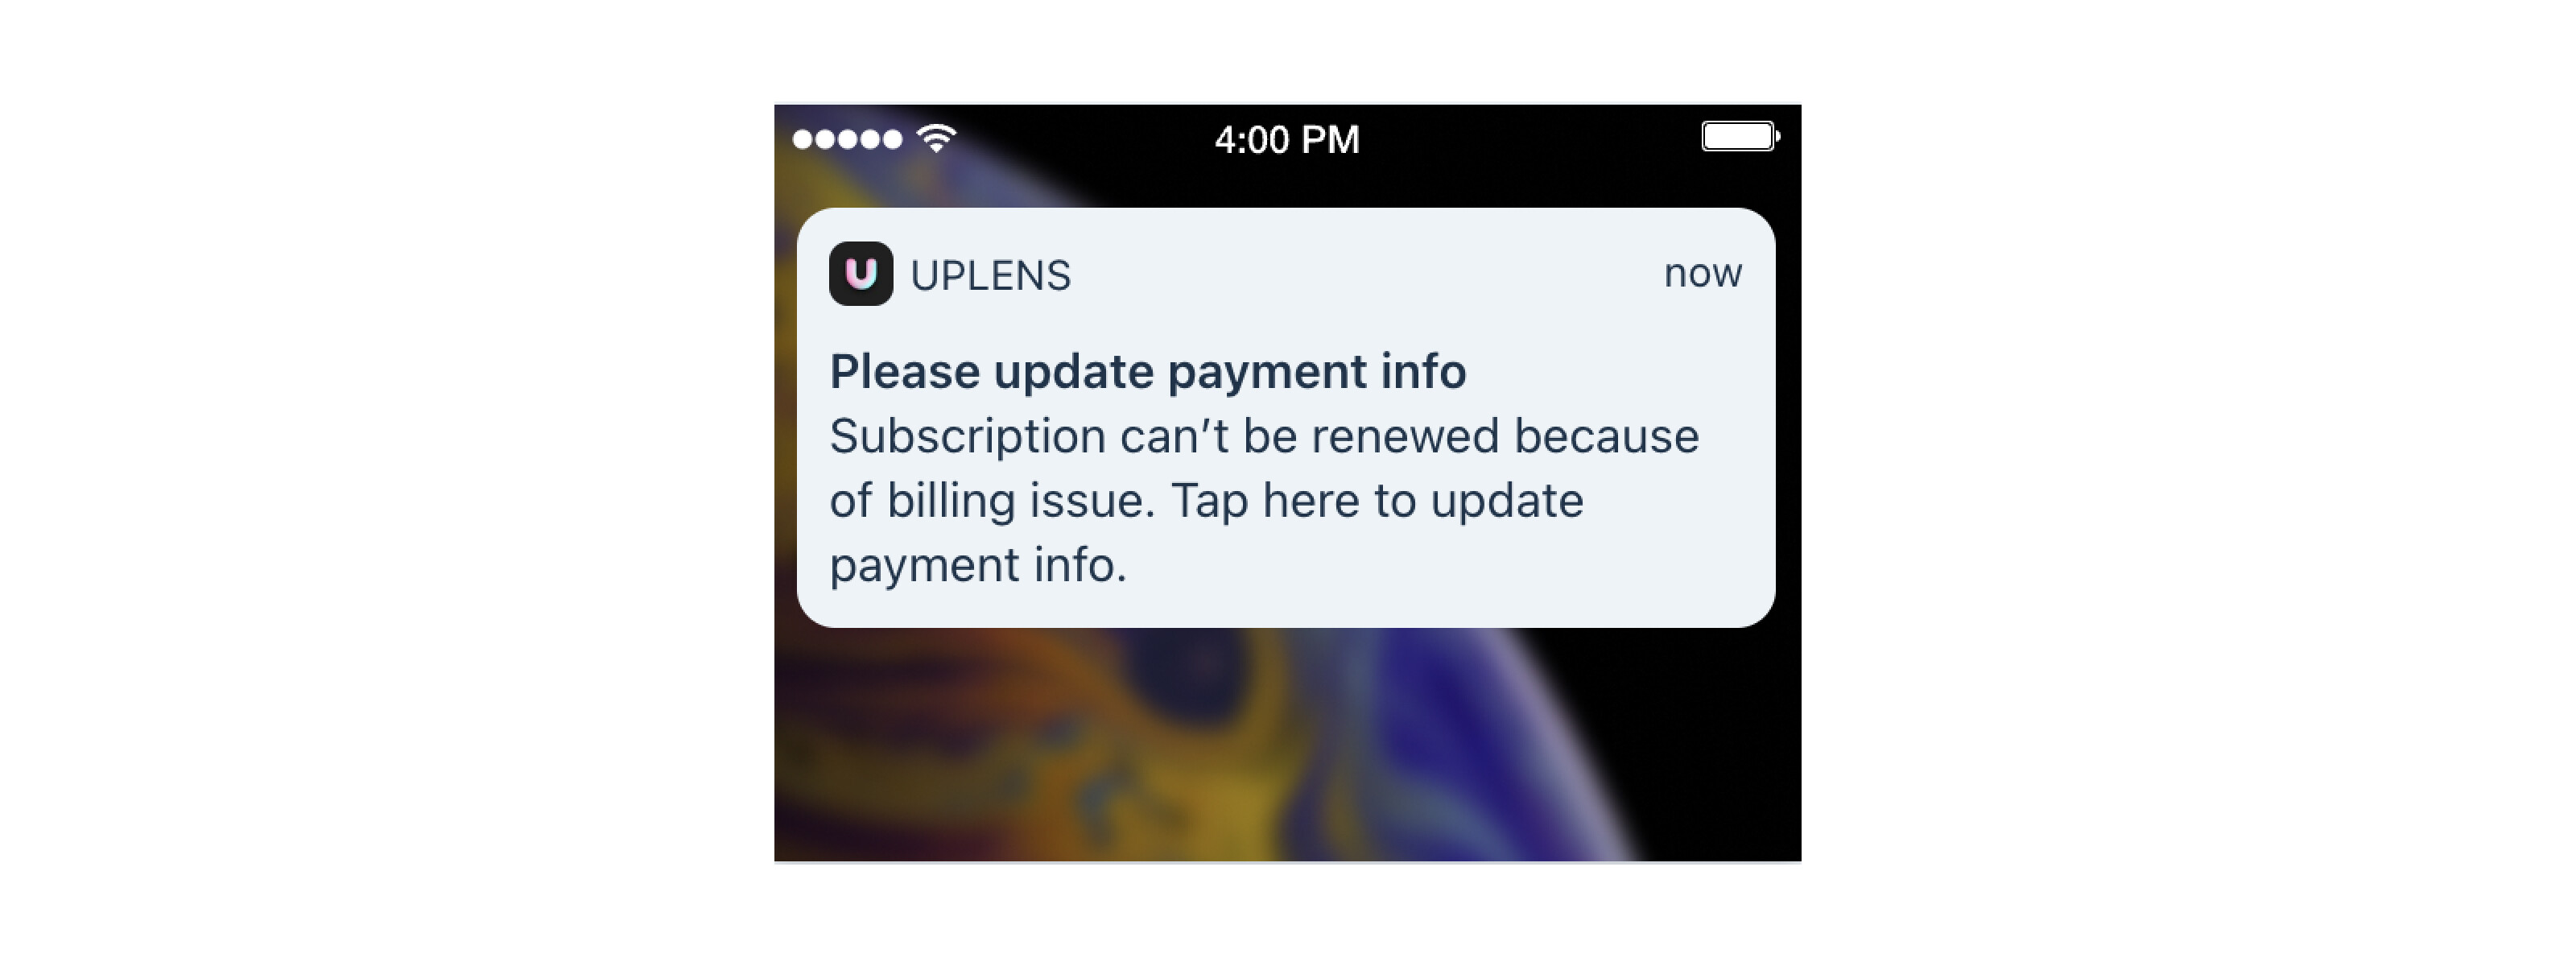 Uplens push notification created in Apphud